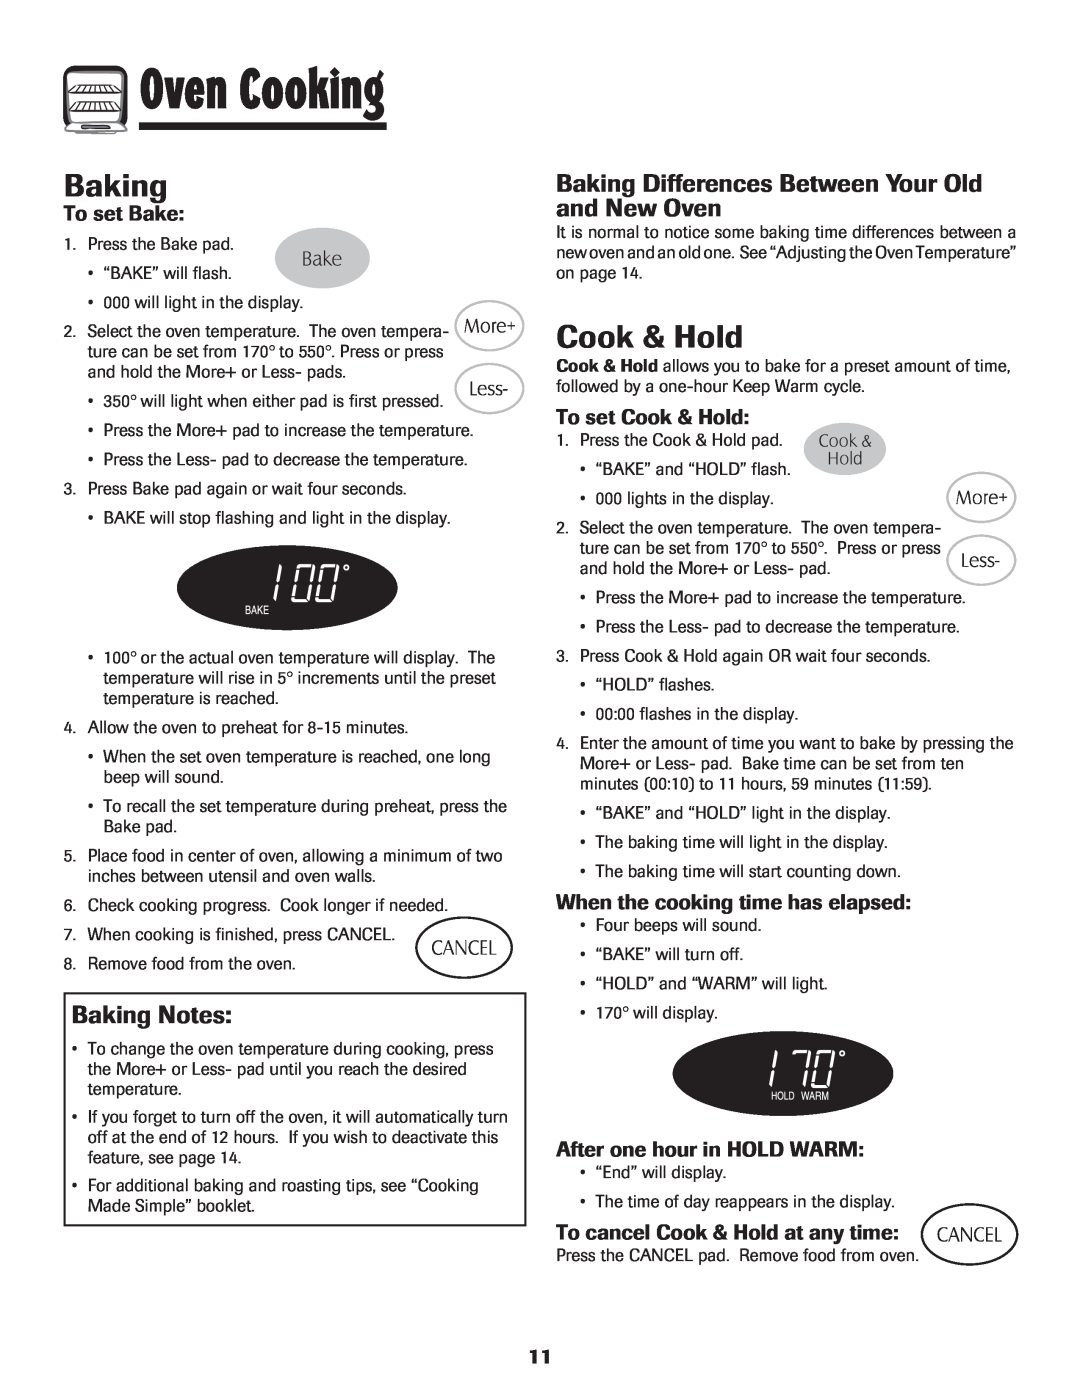 Maytag 8113P424-60 manual Cook & Hold, Baking Notes, Baking Differences Between Your Old and New Oven, To set Bake 